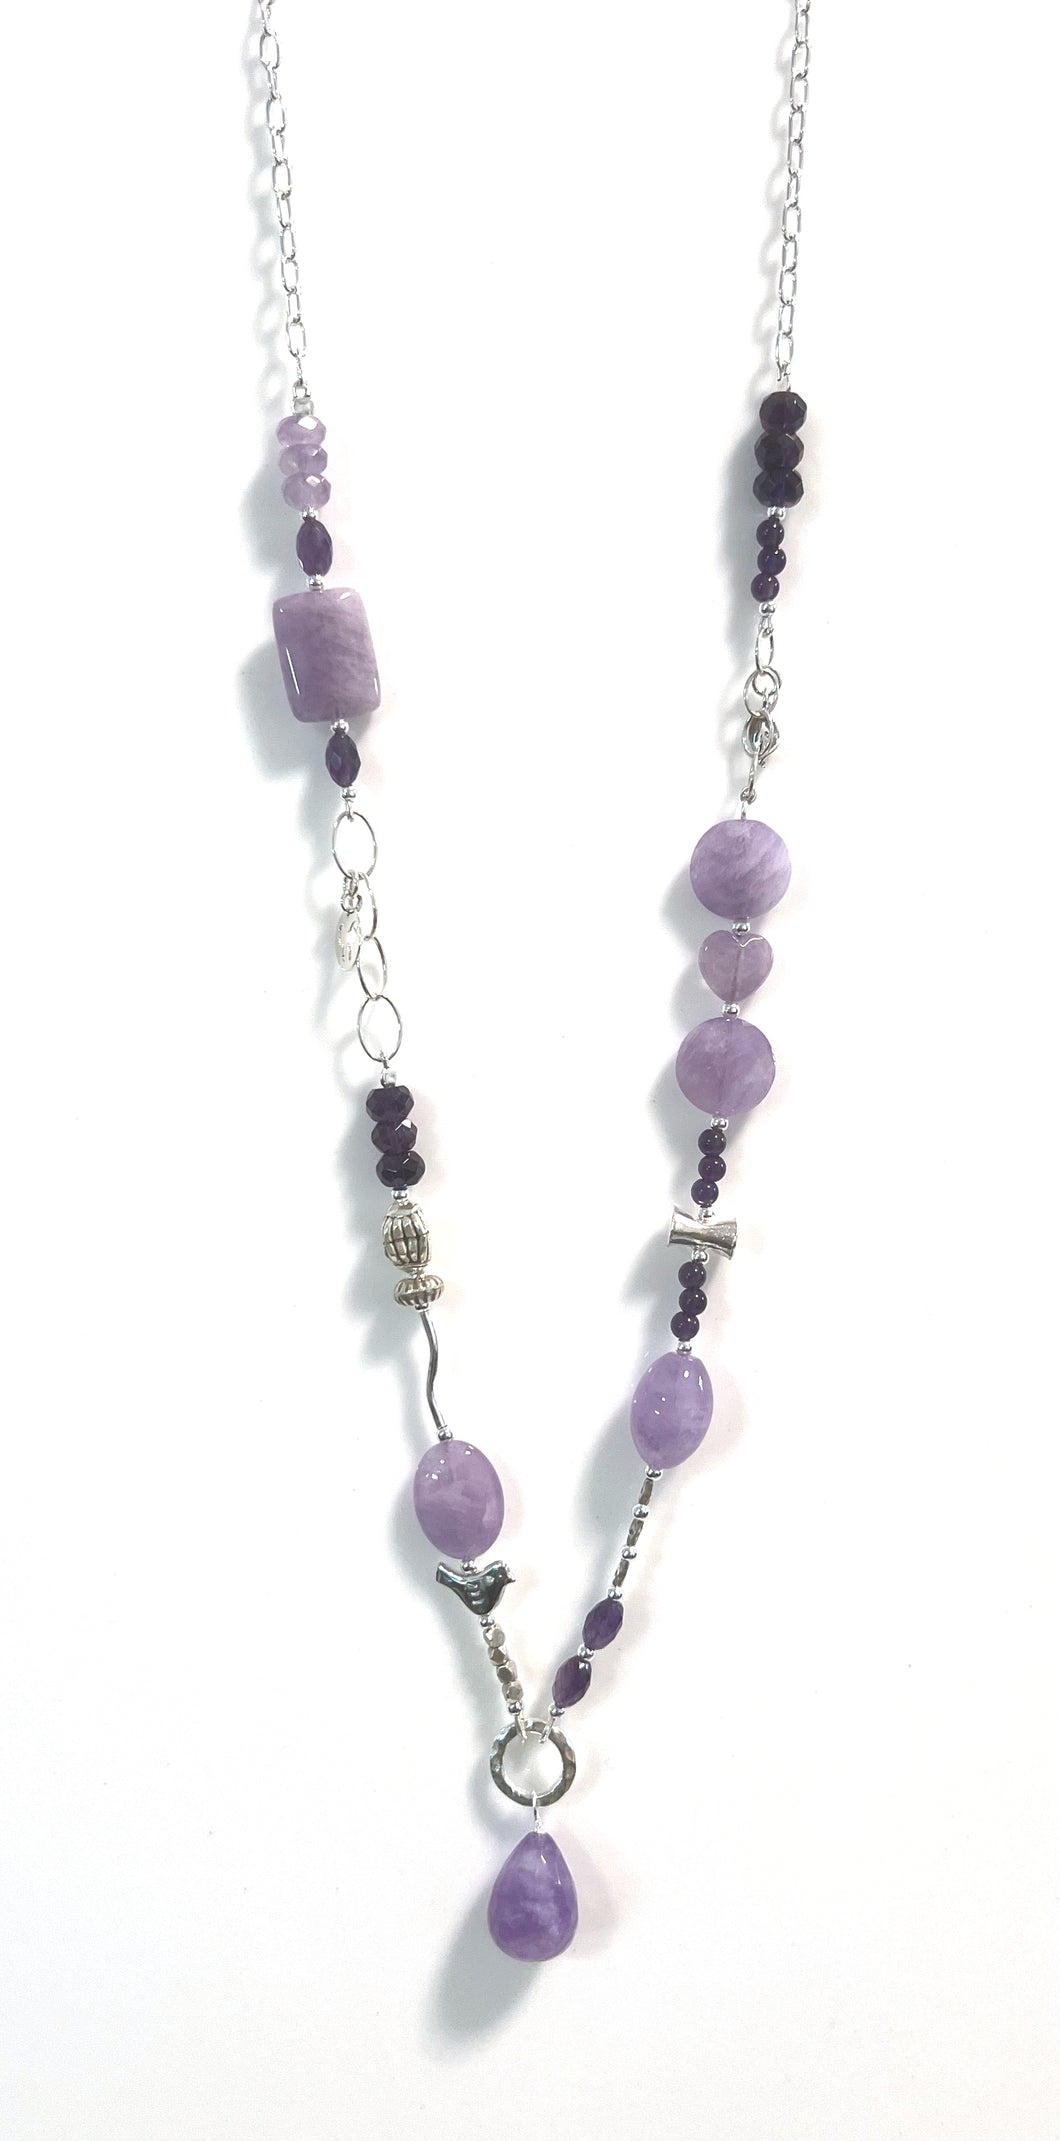 Australian Handmade Purple Necklace with Light and Dark Amethyst and Sterling Silver